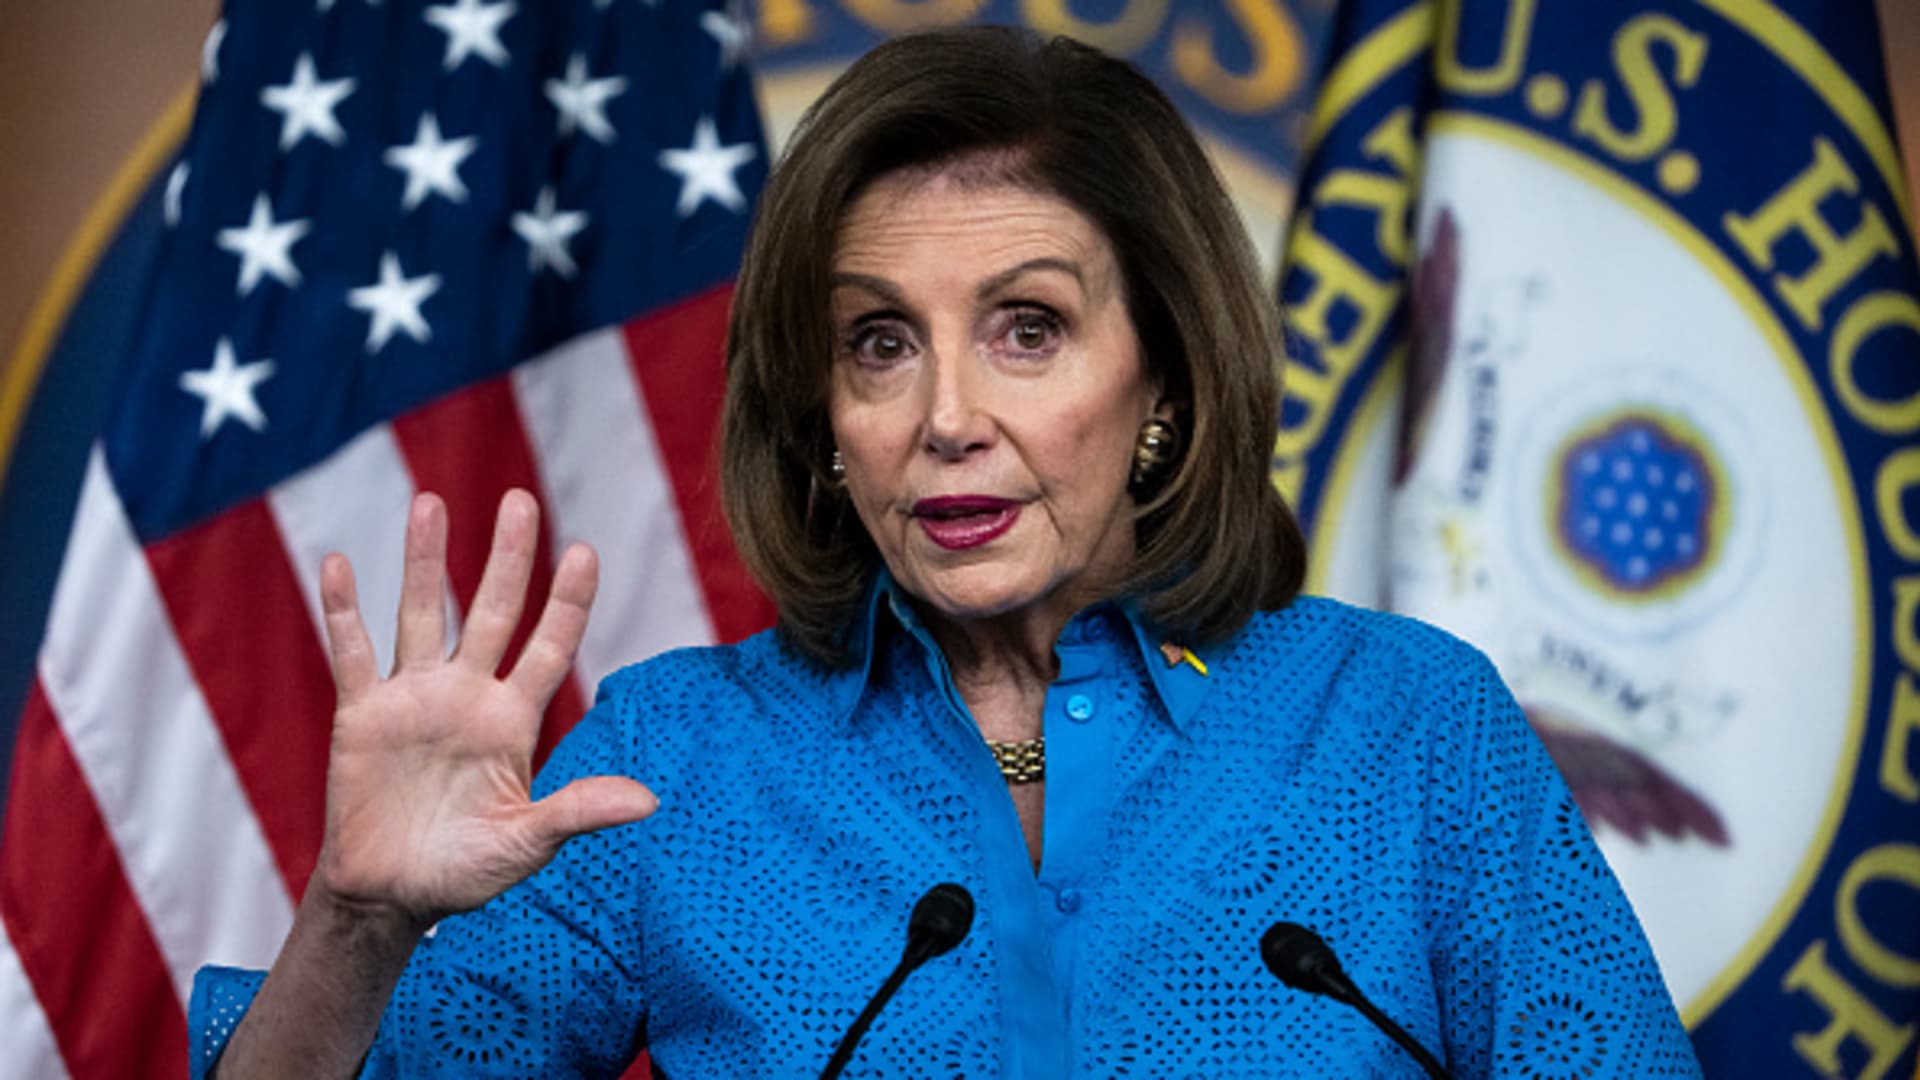 Speaker of the House Nancy Pelosi, D-Calif., conducts her weekly news conference in the Capitol Visitor Center where she addressed the Russian invasion of Ukraine on Thursday, March 17, 2022.